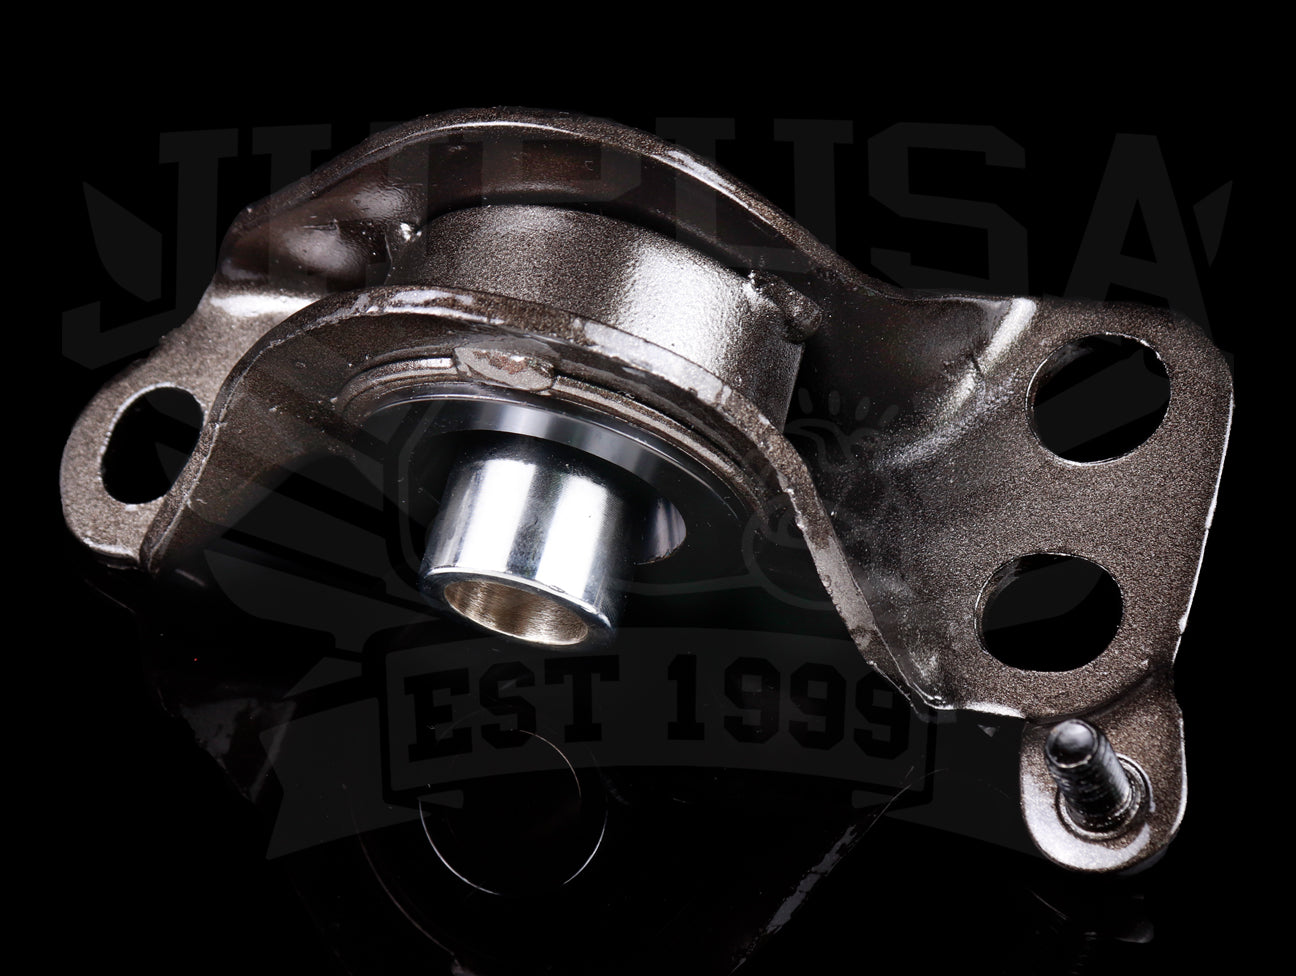 K-Tuned Spherical Front Compliance Bushings - 92-95 Civic / 94-01 Integra